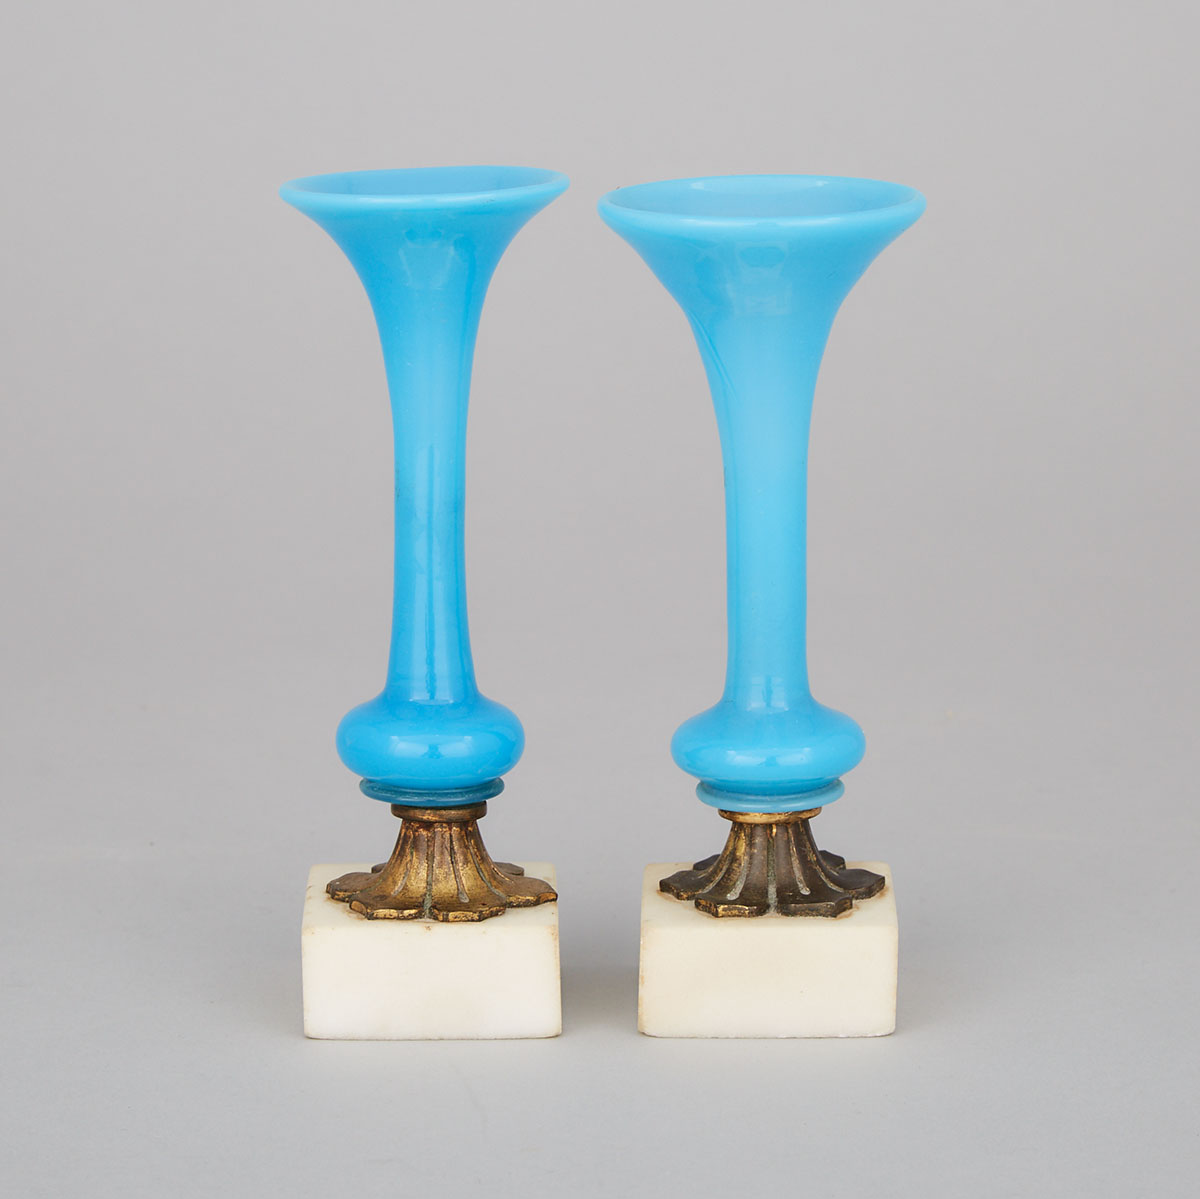 Pair of French Gilt Bronze Mounted Blue Opaline Glass Bud Vases, mid 19th century